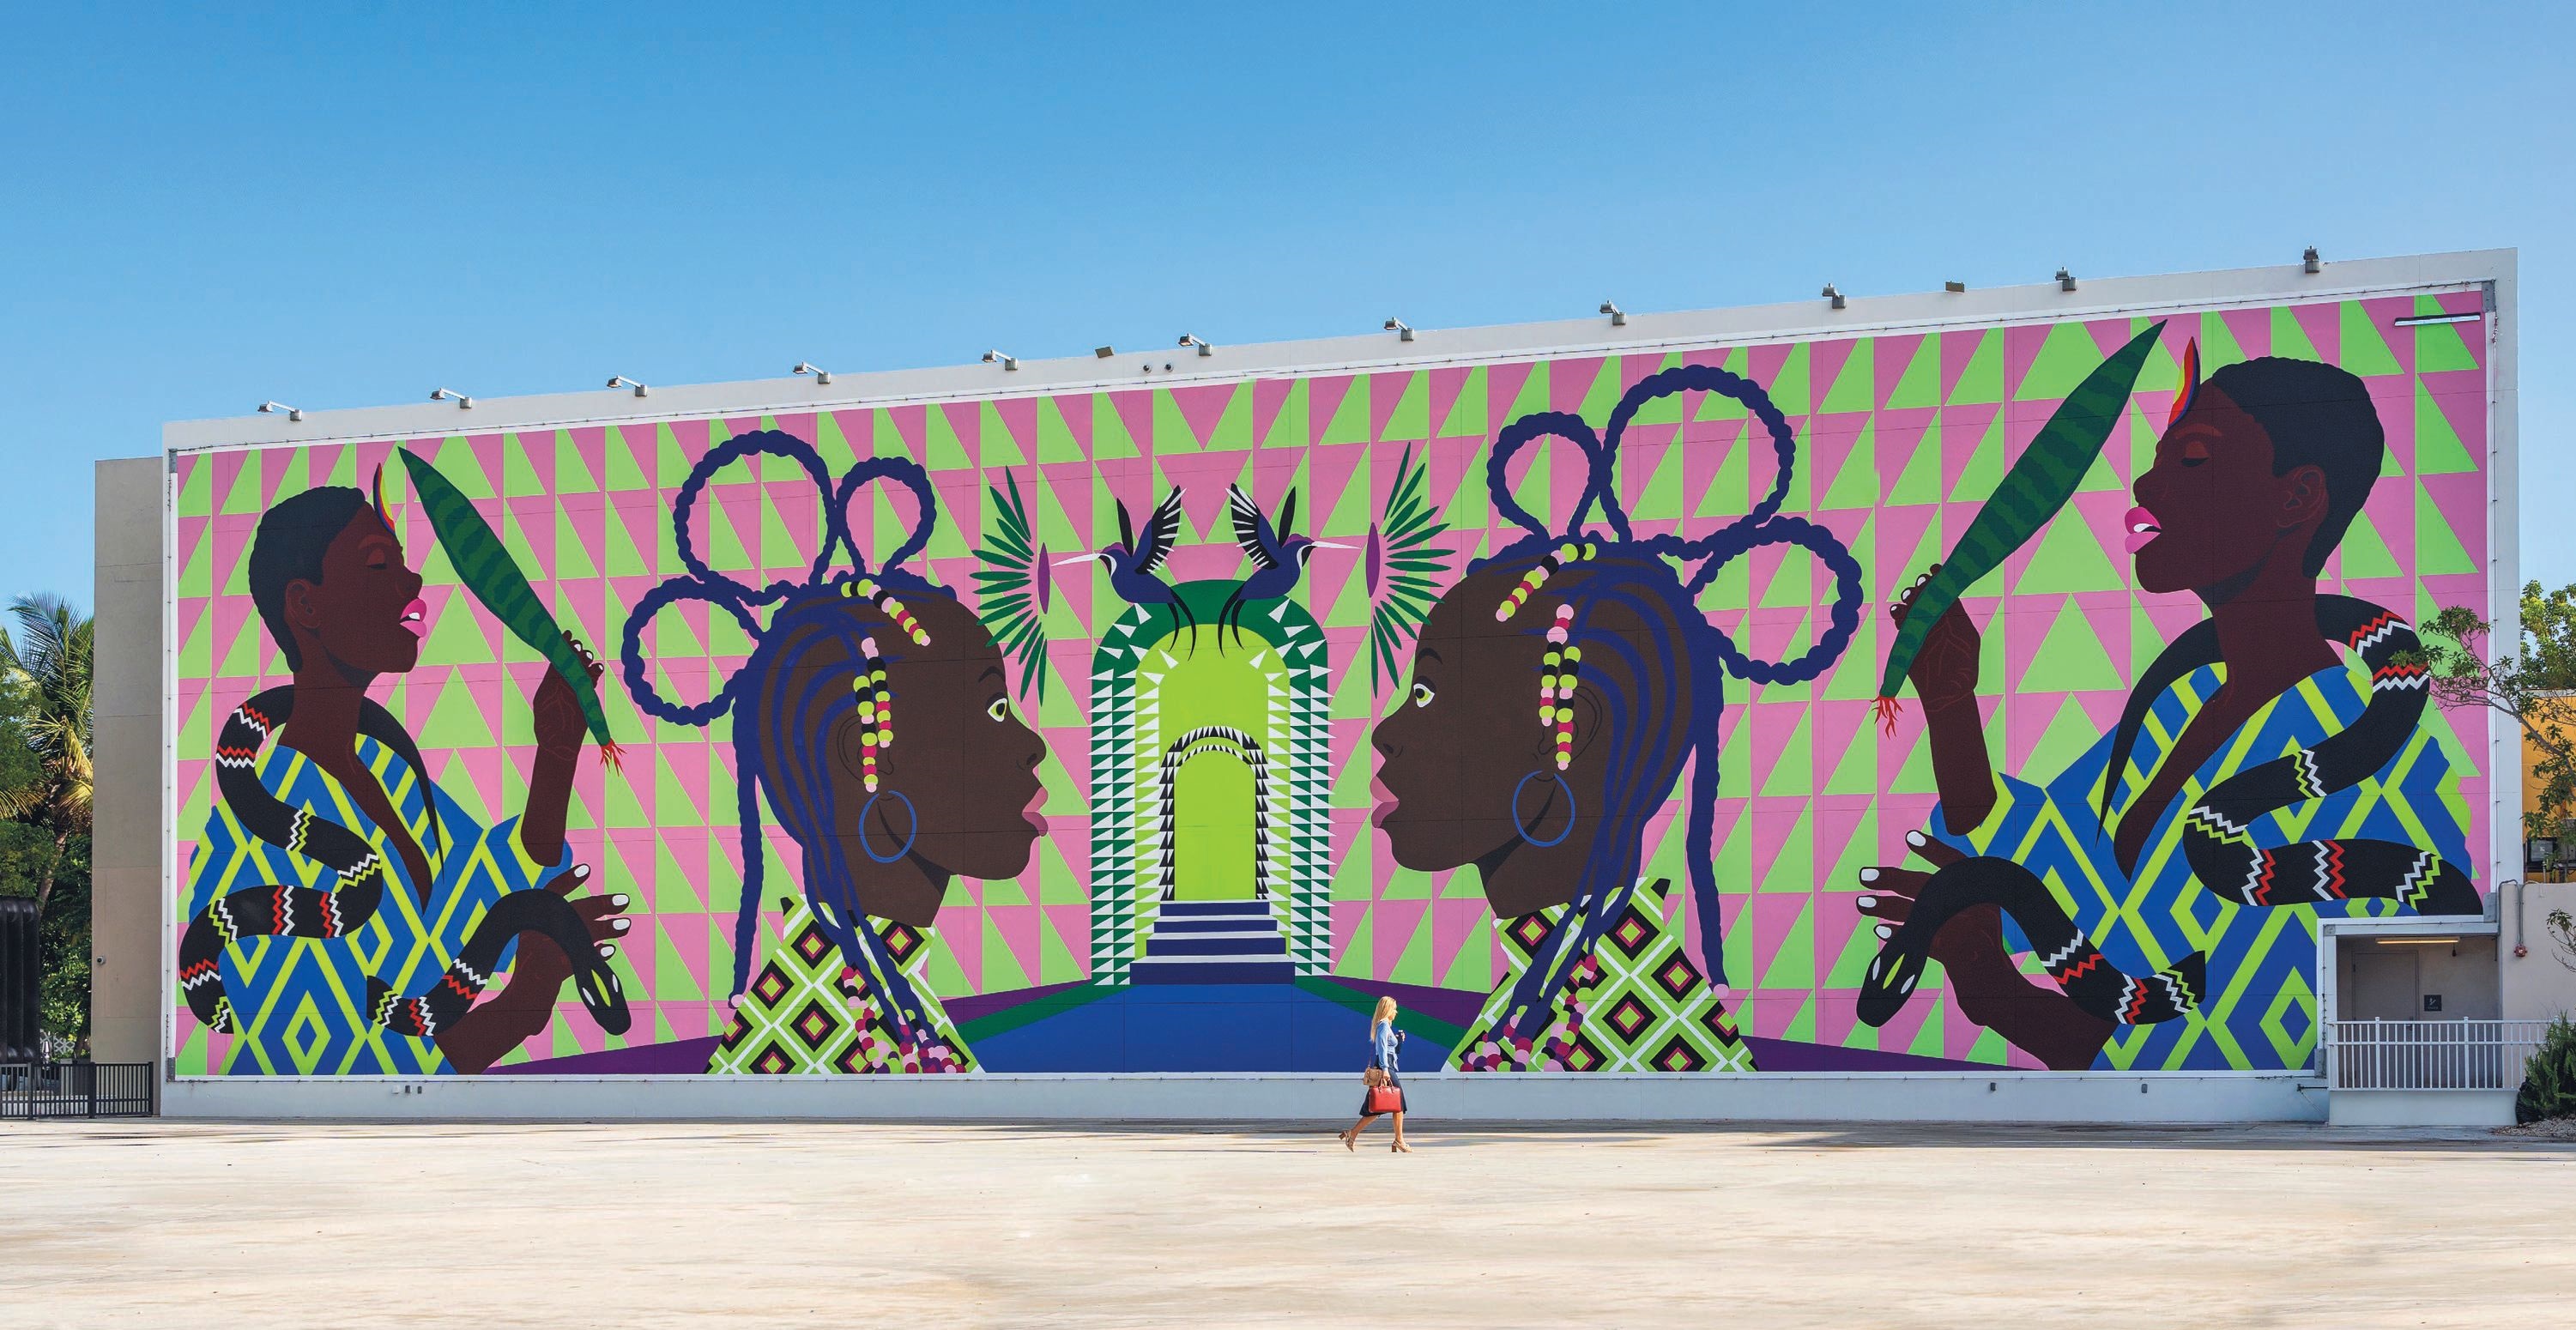 Criola’s striking and colorful “Interdimensional Portal” mural is now on view in the Miami Design District’s Jungle Plaza. PHOTO BY LUIS GOMEZ